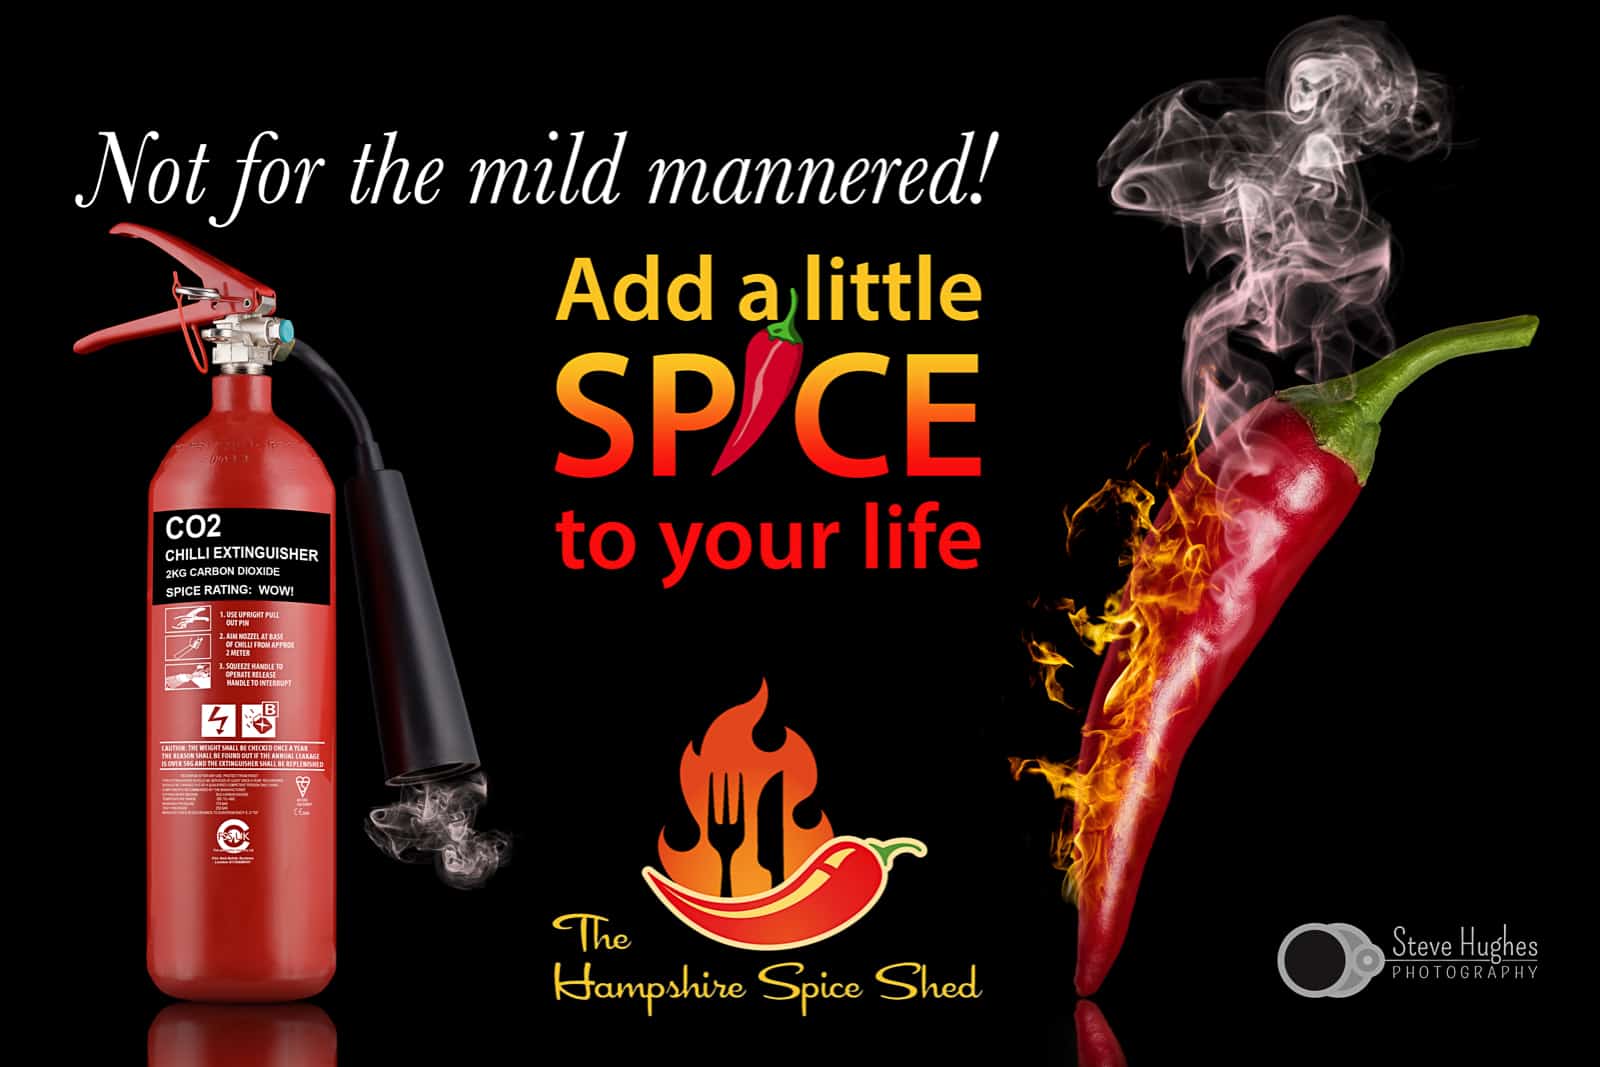 composite photograph of smoking red chillie pepper and red fire extinguisher with branding and text